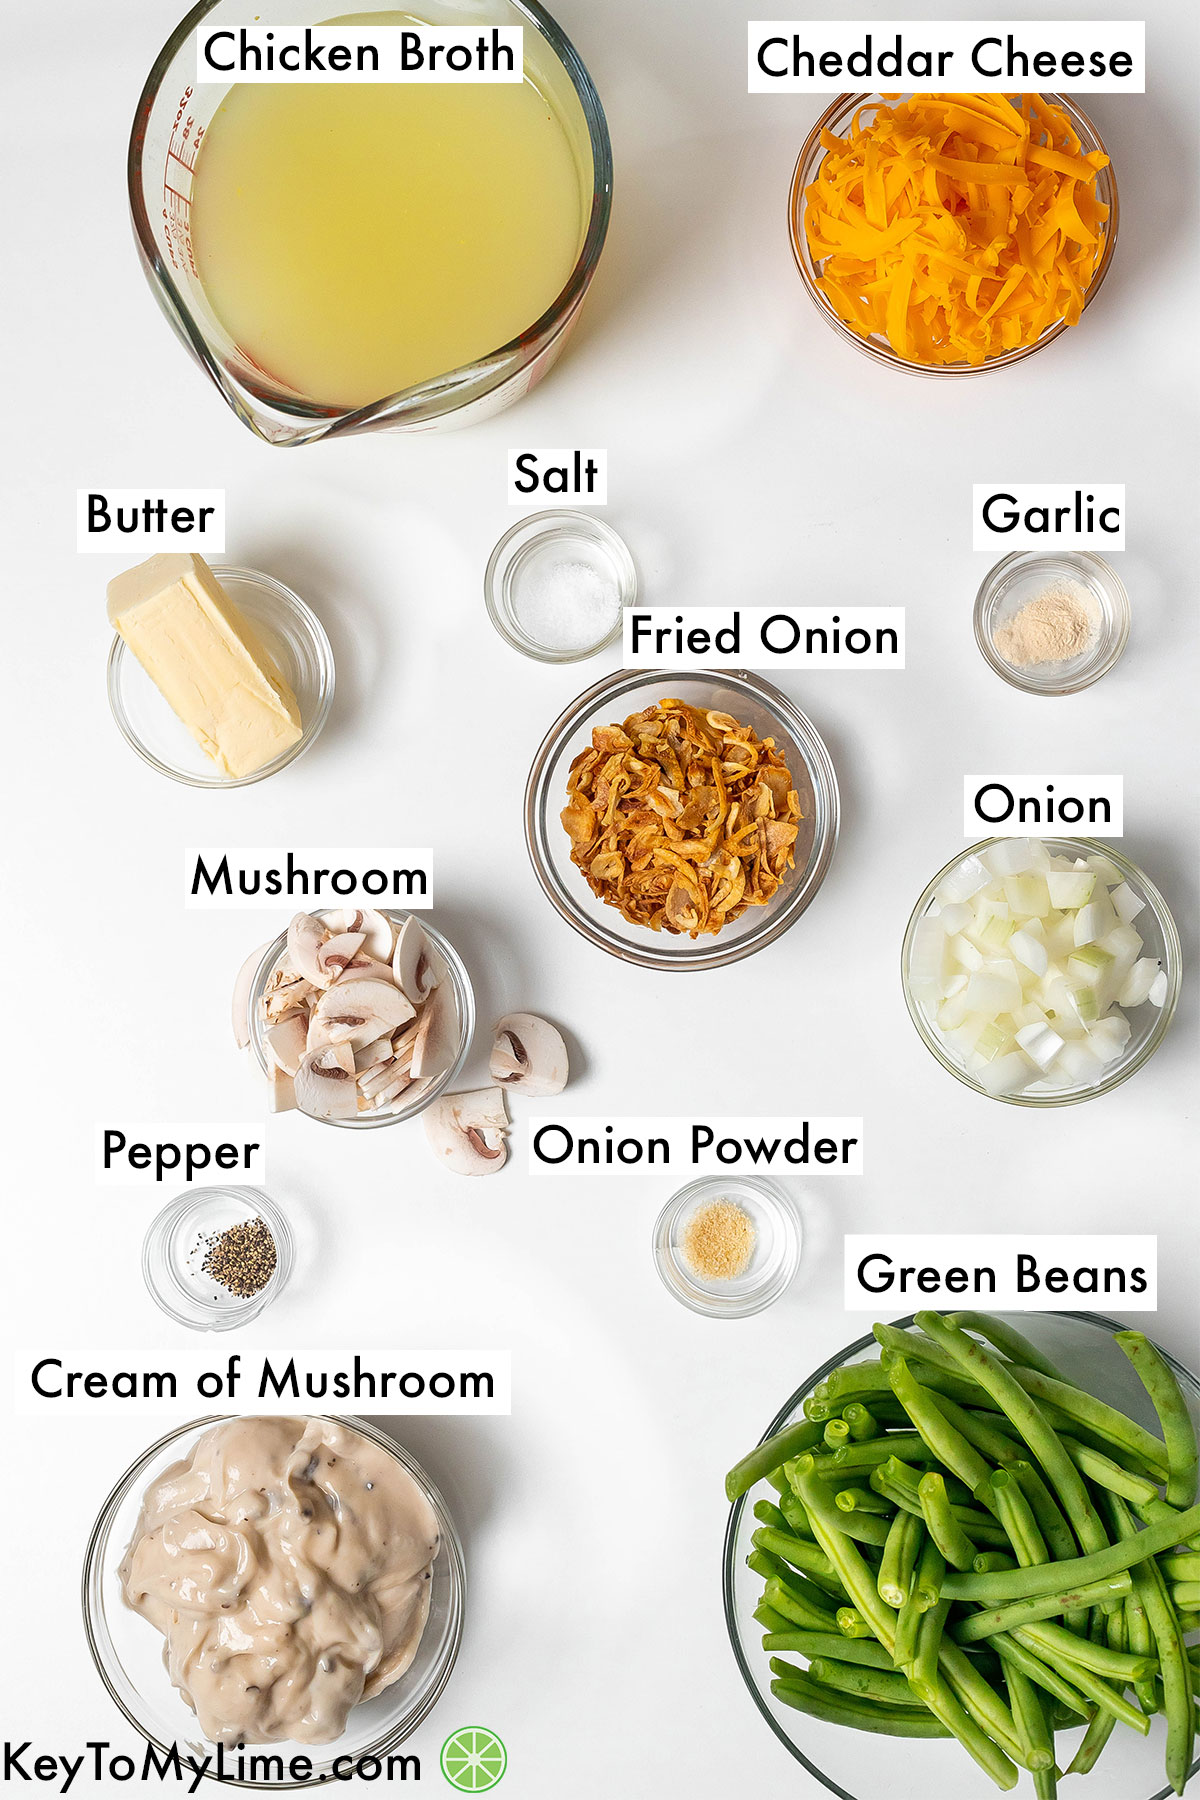 The labeled ingredients for paula deen green bean casserole.